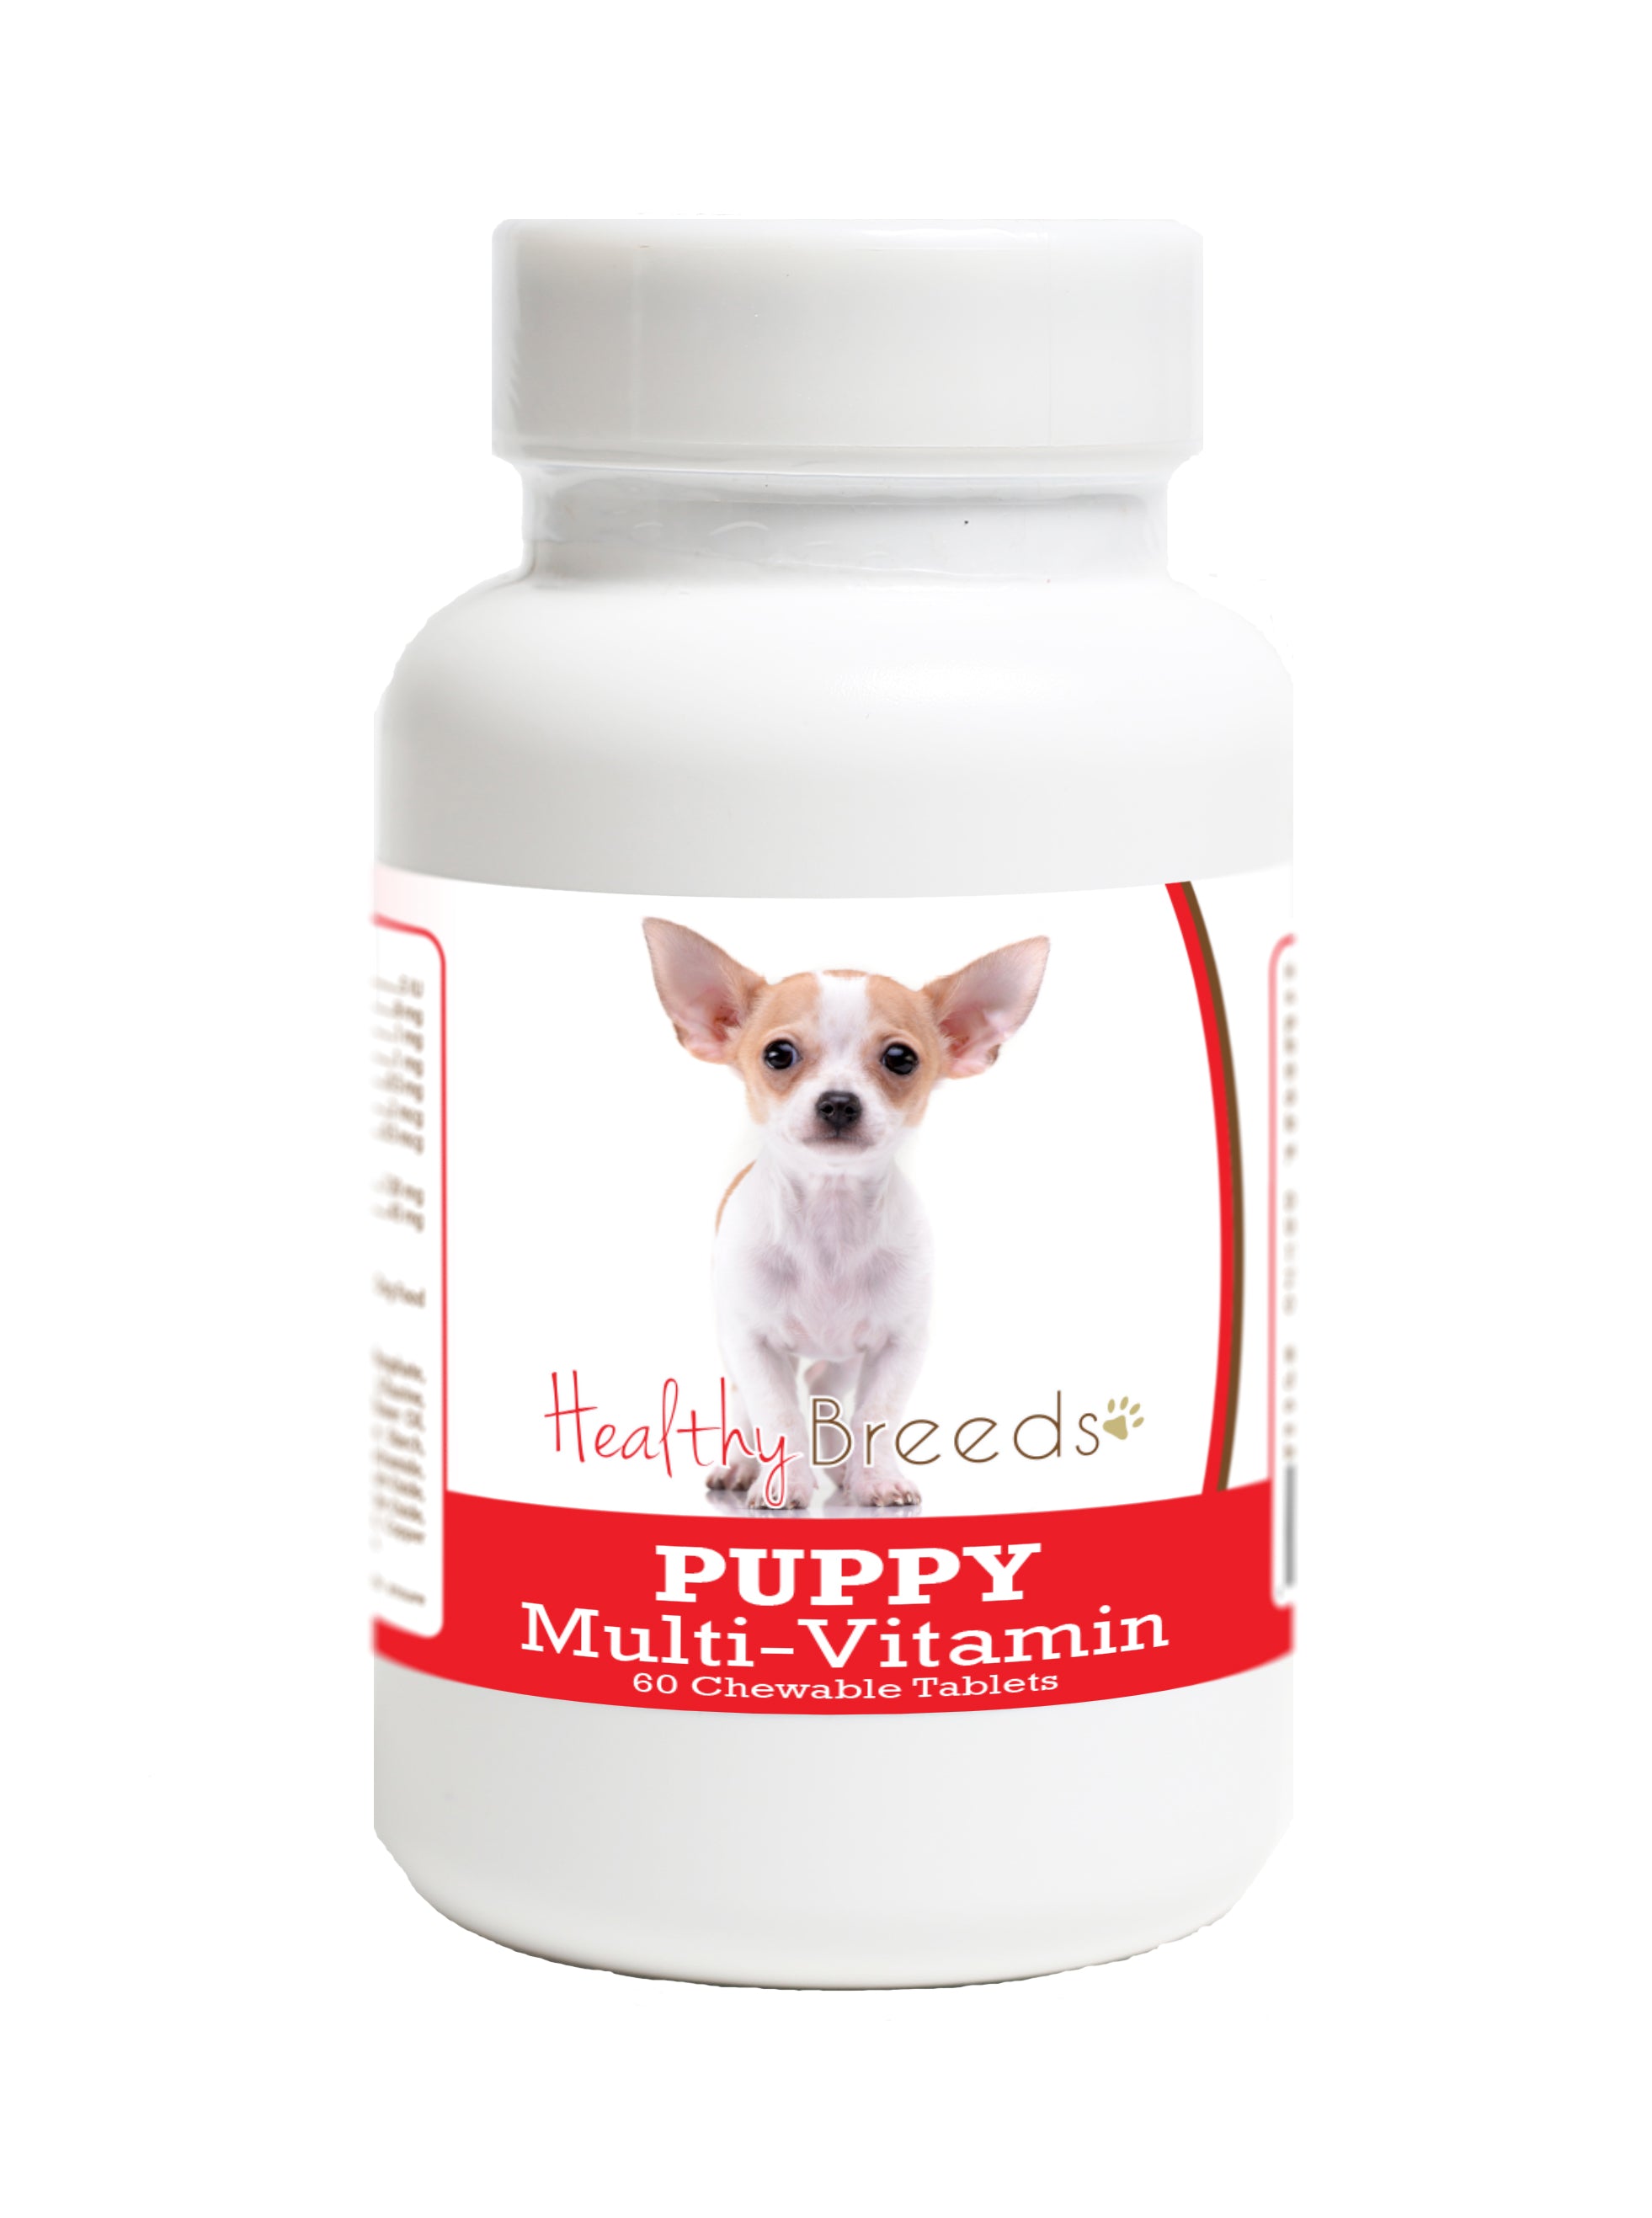 Chihuahua Puppy Dog Multivitamin Tablet 60 Count